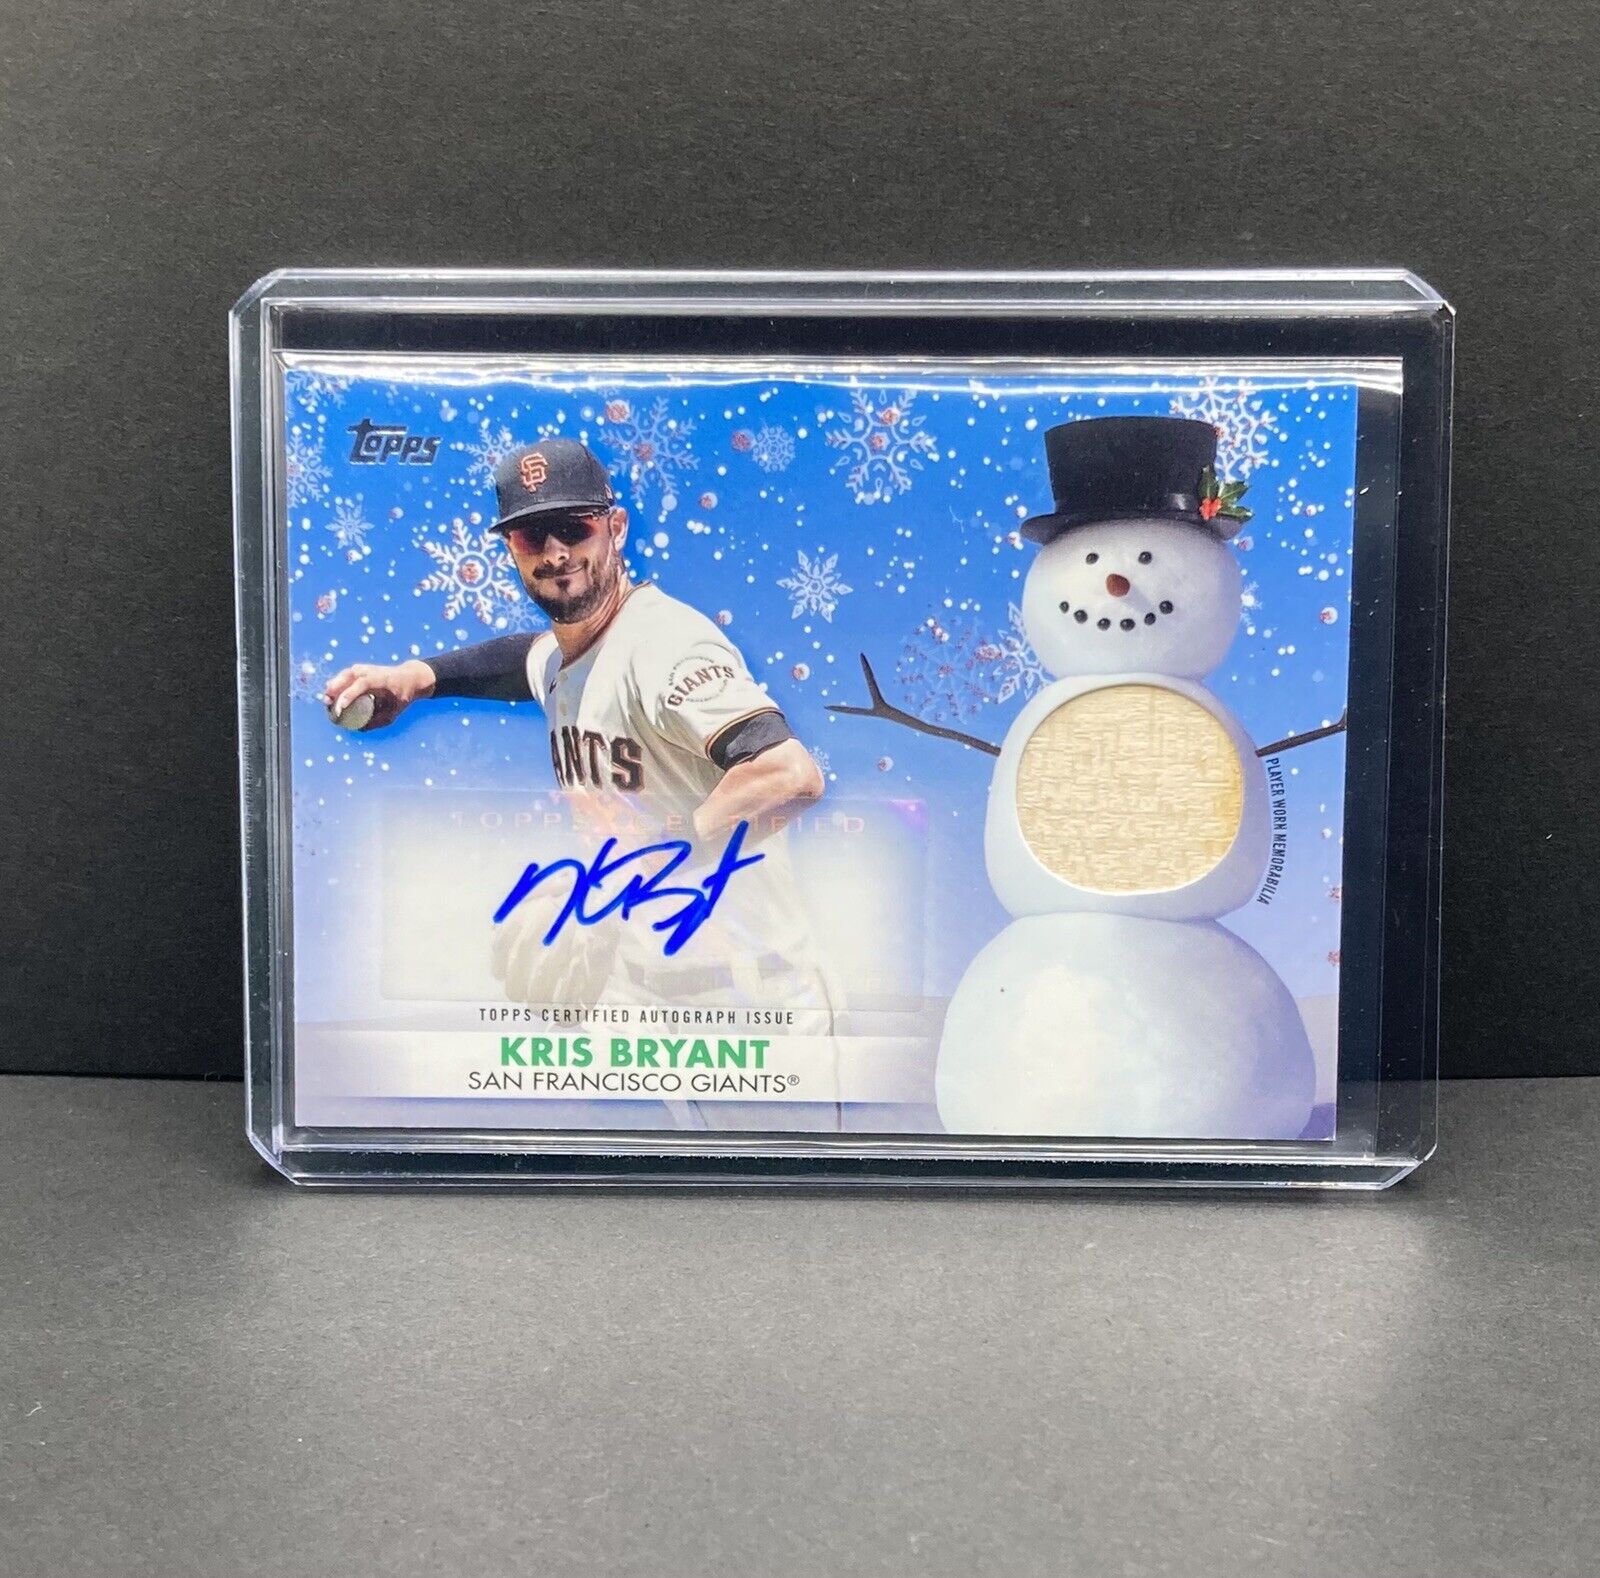 2021 Topps Holiday KRIS BRYANT Autograph Bat Relic /10 Red Metallic Parallel SSP